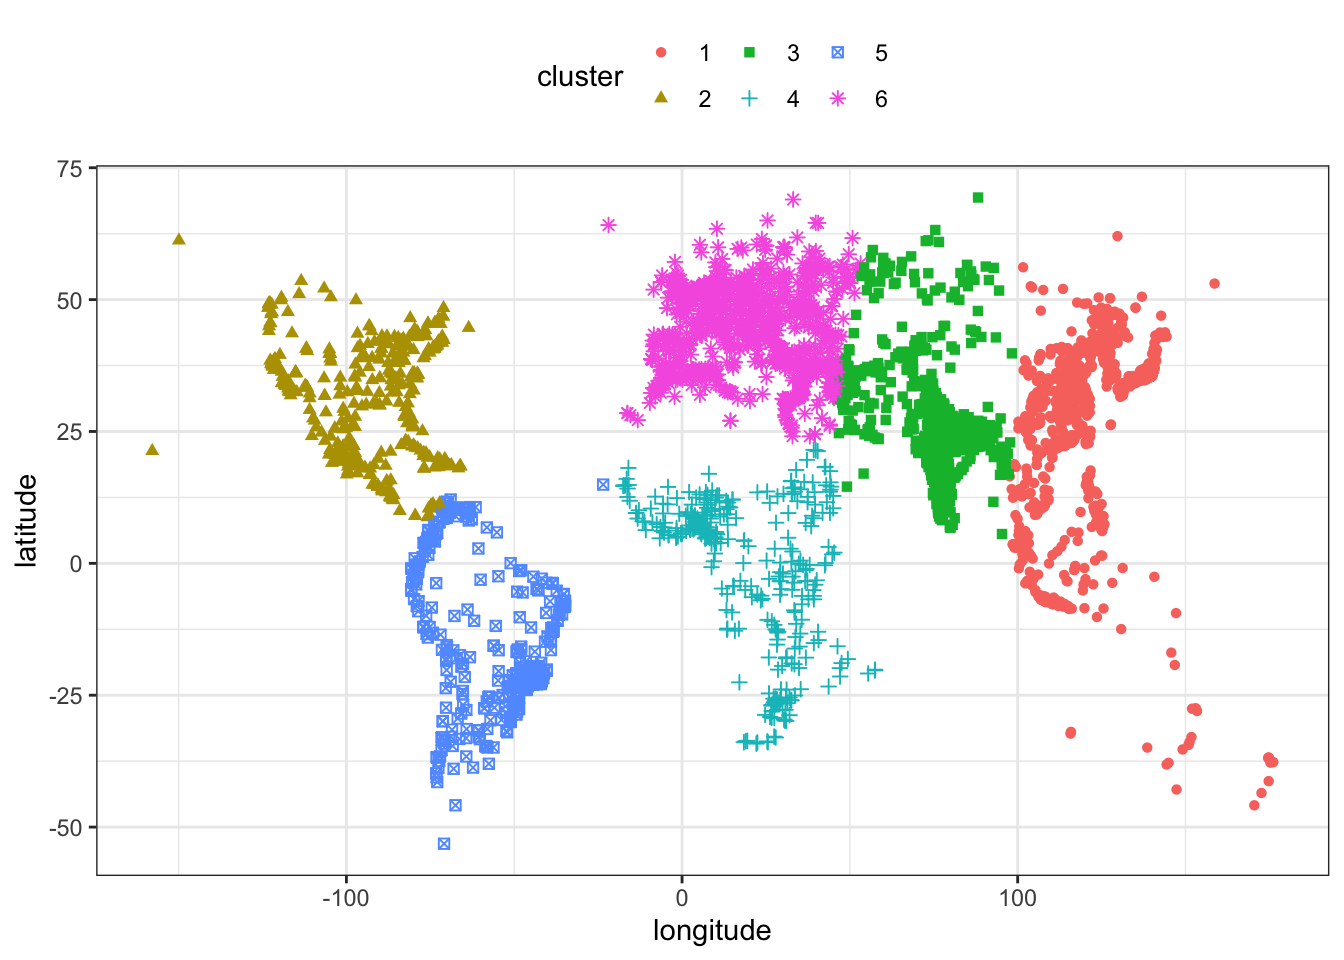 Clustering of world cities by their geographical position.